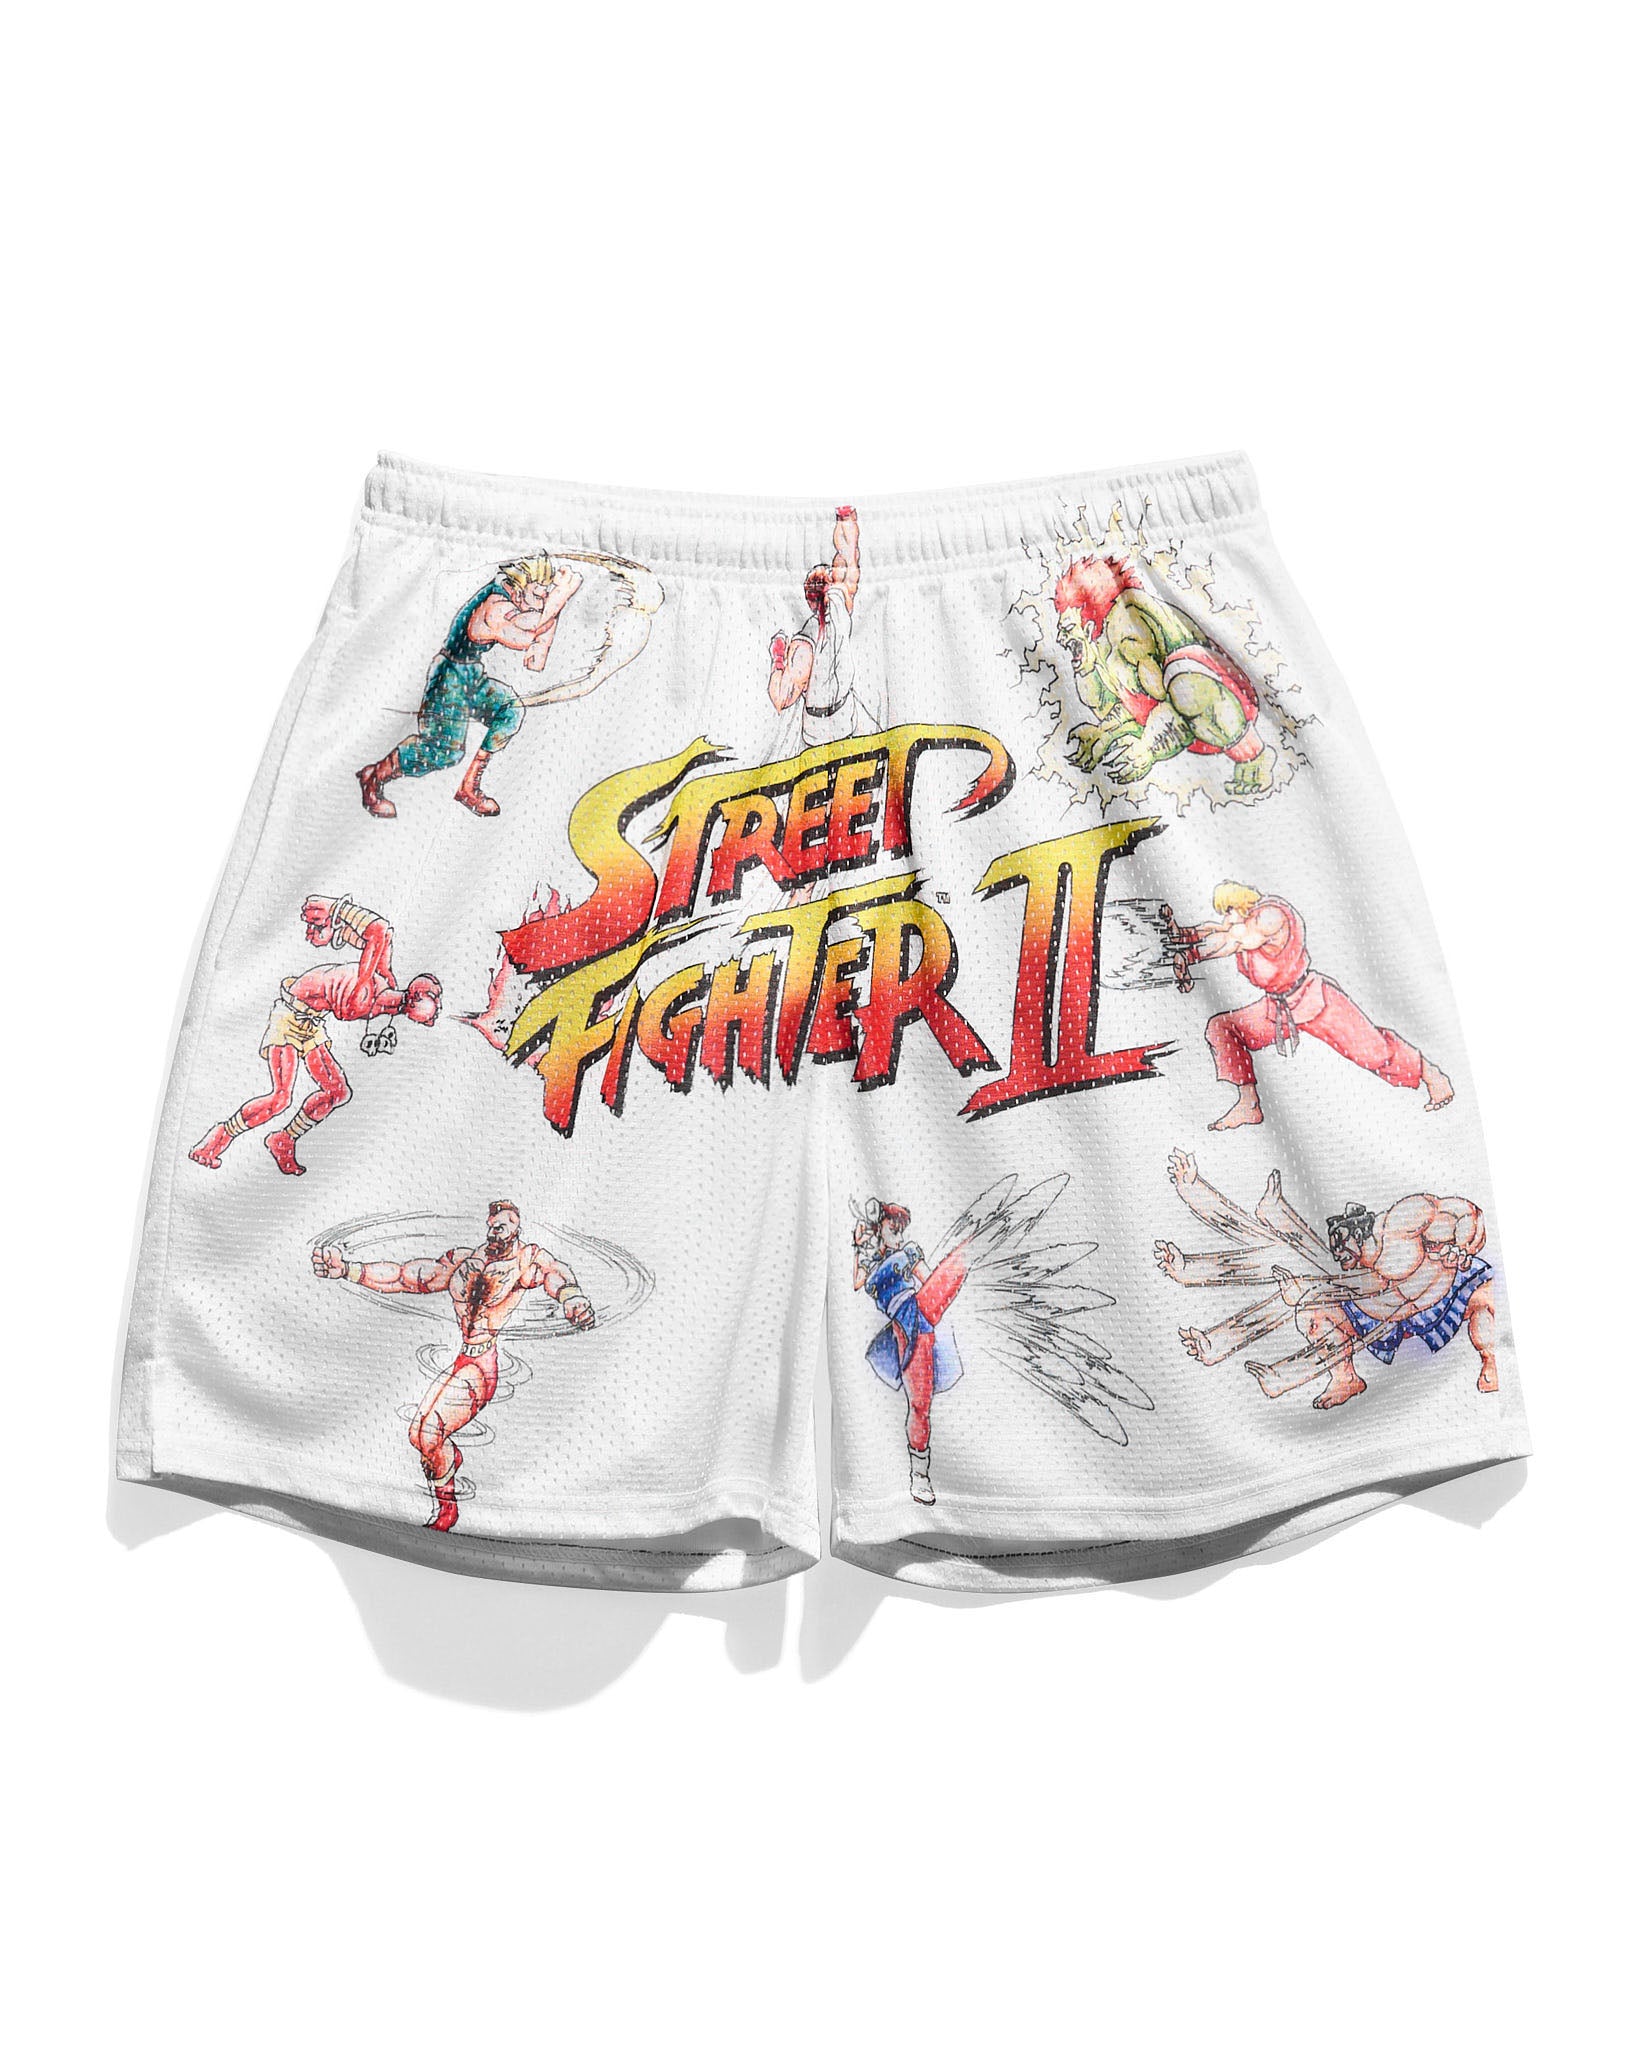 Street Fighter 2 Character Concepts Retro Shorts